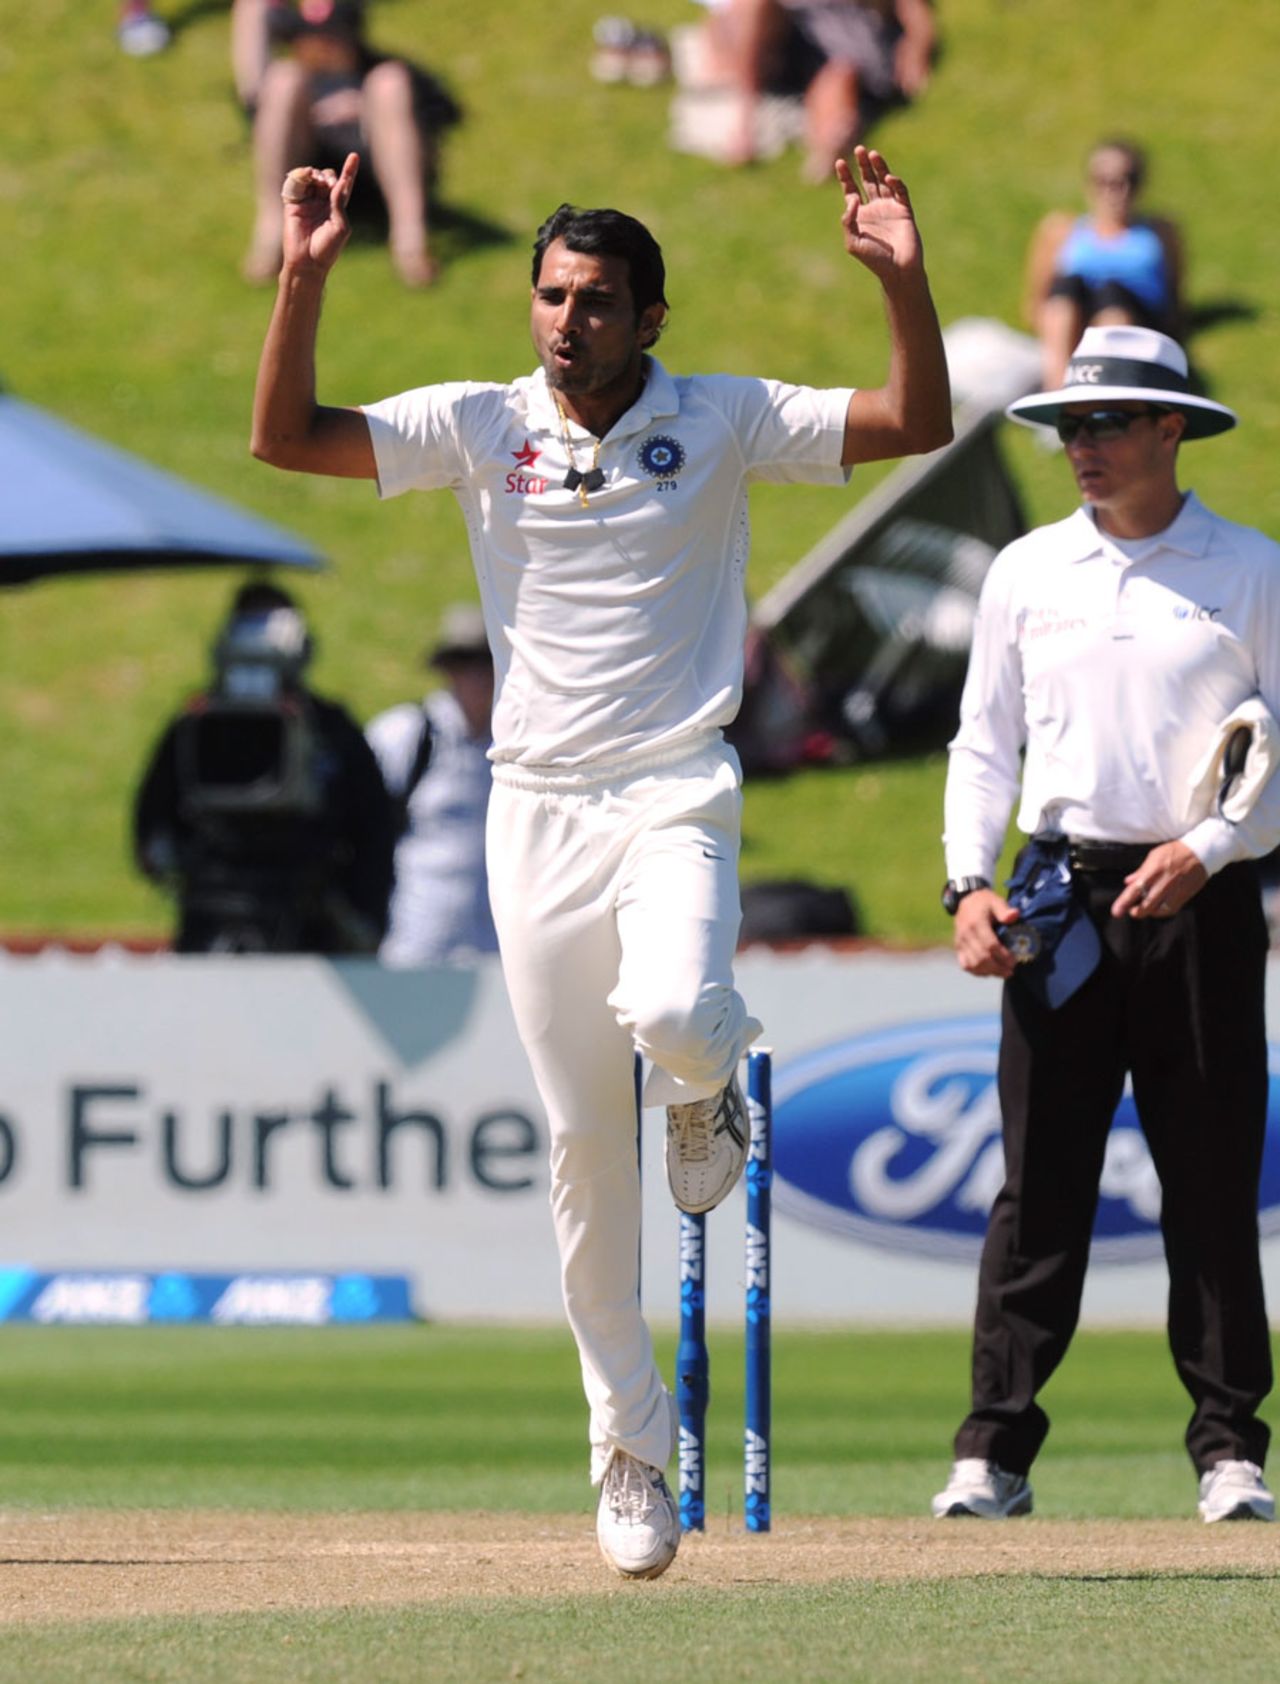 India went 123 overs without a wicket before Mohammed Shami struck, New Zealand v India, 2nd Test, 4th day, Wellington, February 17, 2014